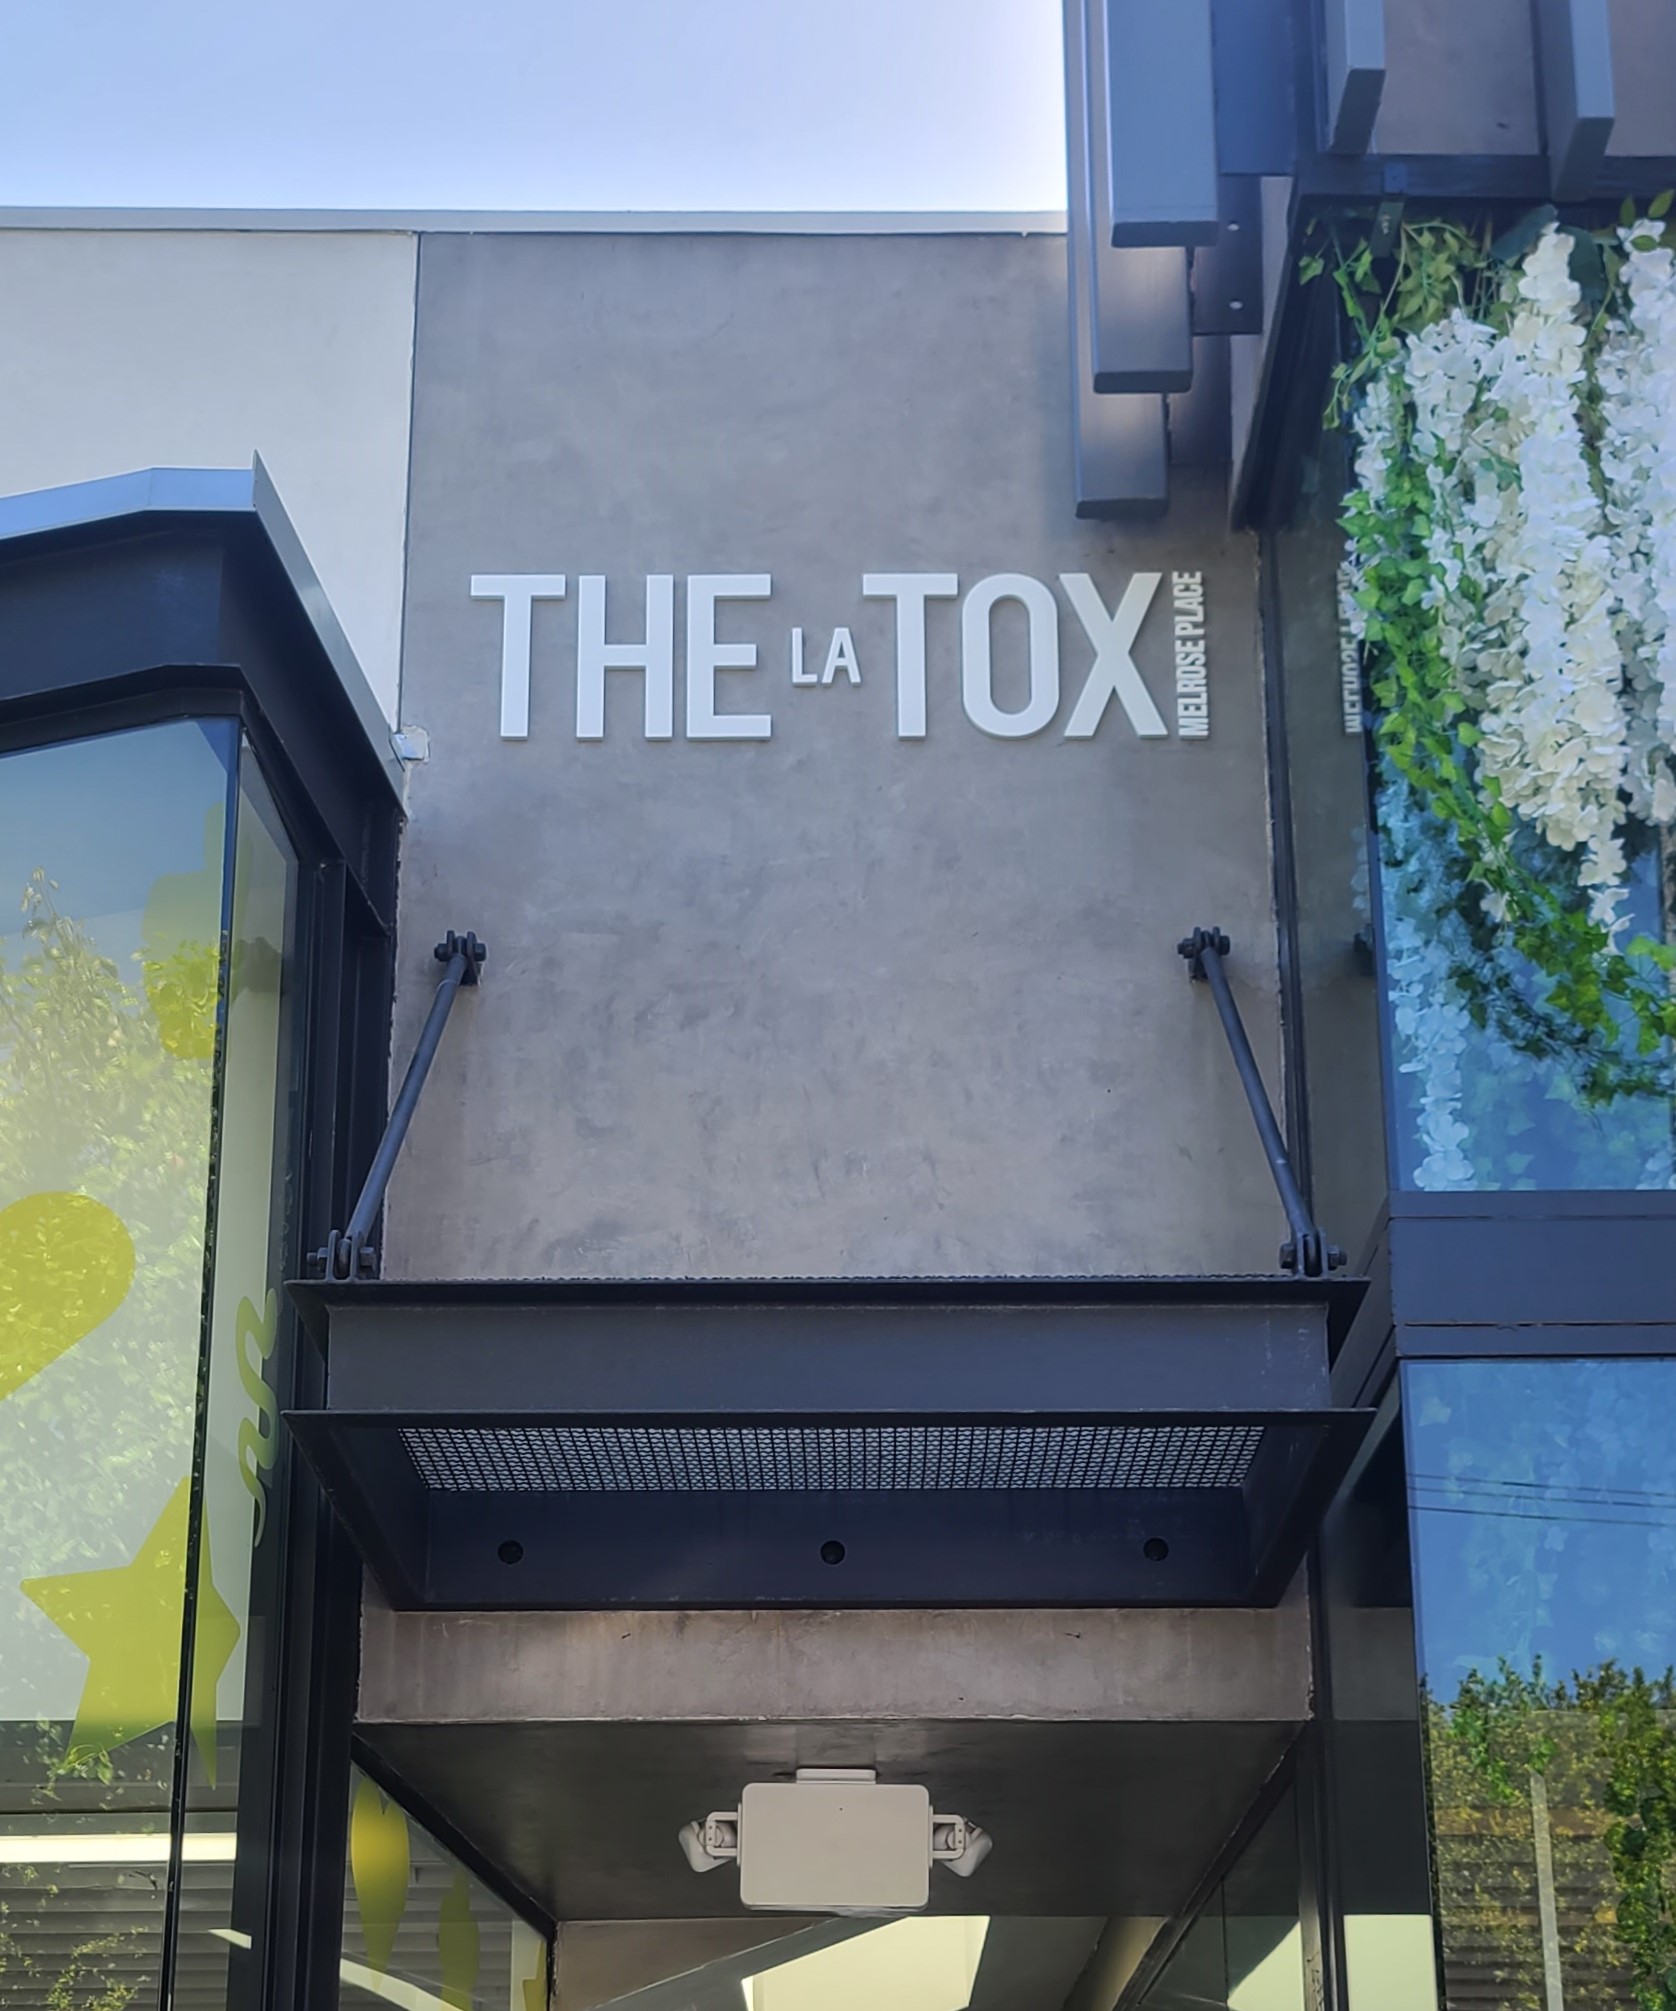 These are the acrylic letter building signs for The Tox LA's spa in Studio City. With this, their health salon will be more prominent.